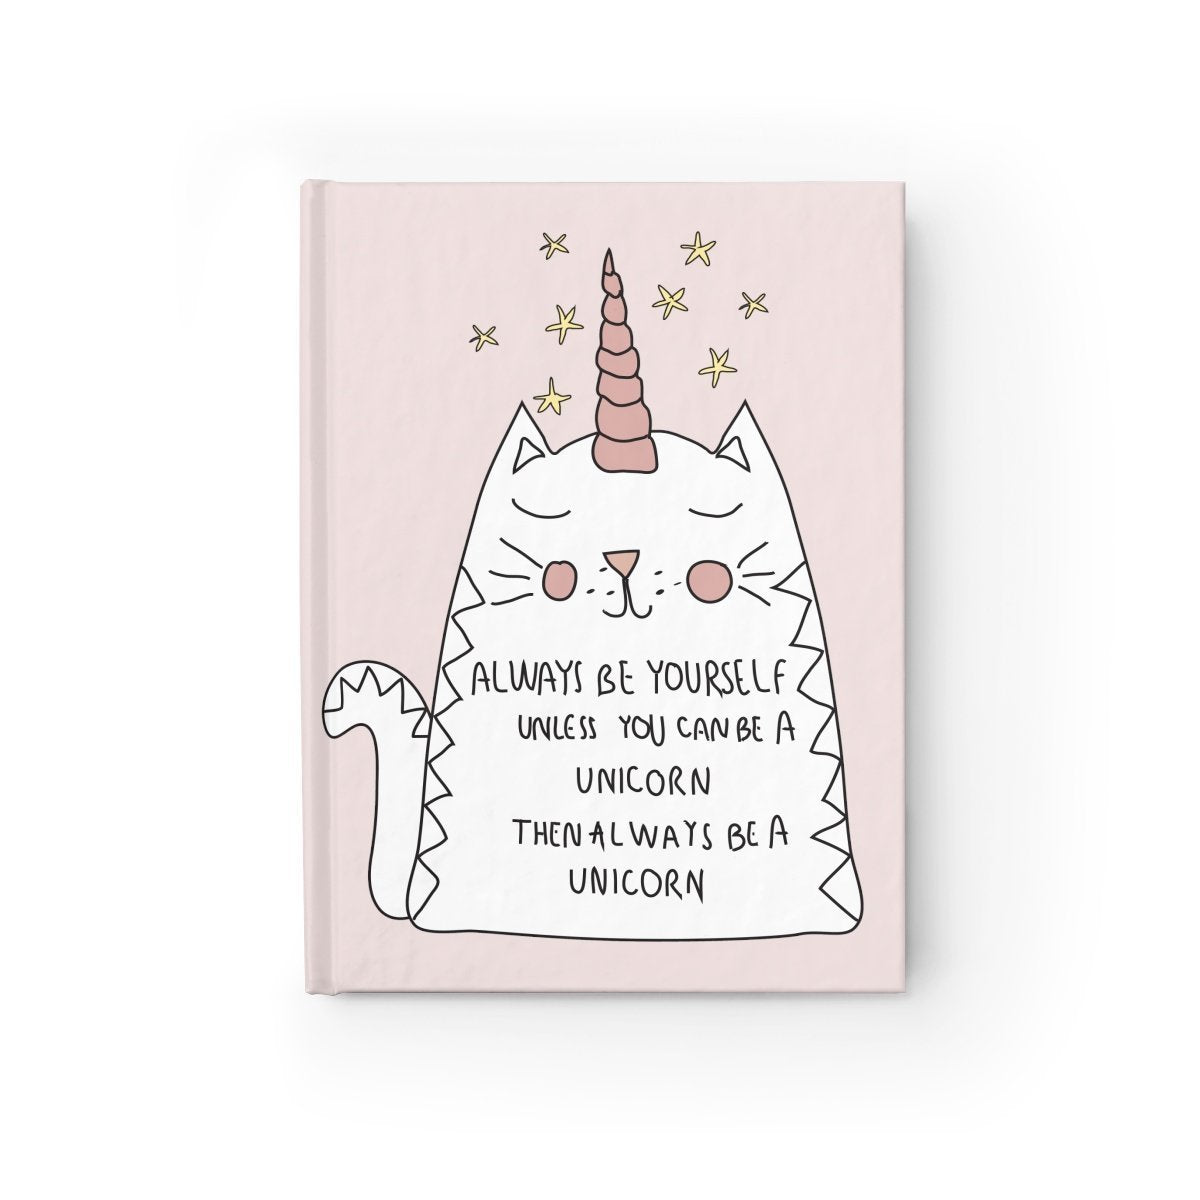 Sure to be your go to kitty cat accessory, this cat journal features a unicorn cat on a pink background with the print "Always be yourself unless you can be a unicorn. Then always be a unicorn."